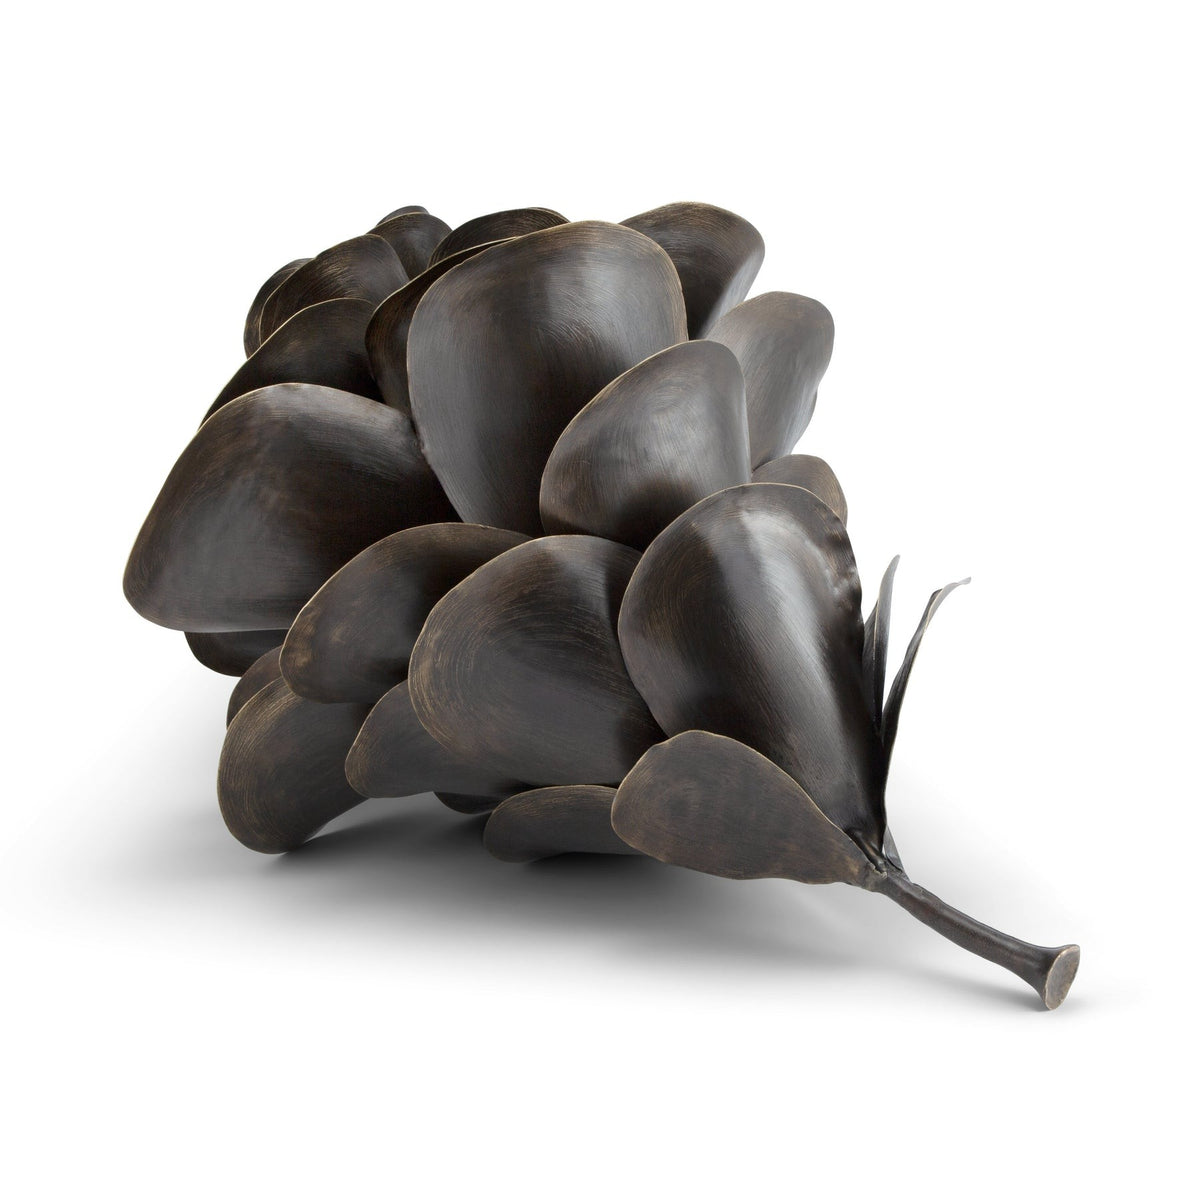 Pine Cone Object (Limited Edition of 500)